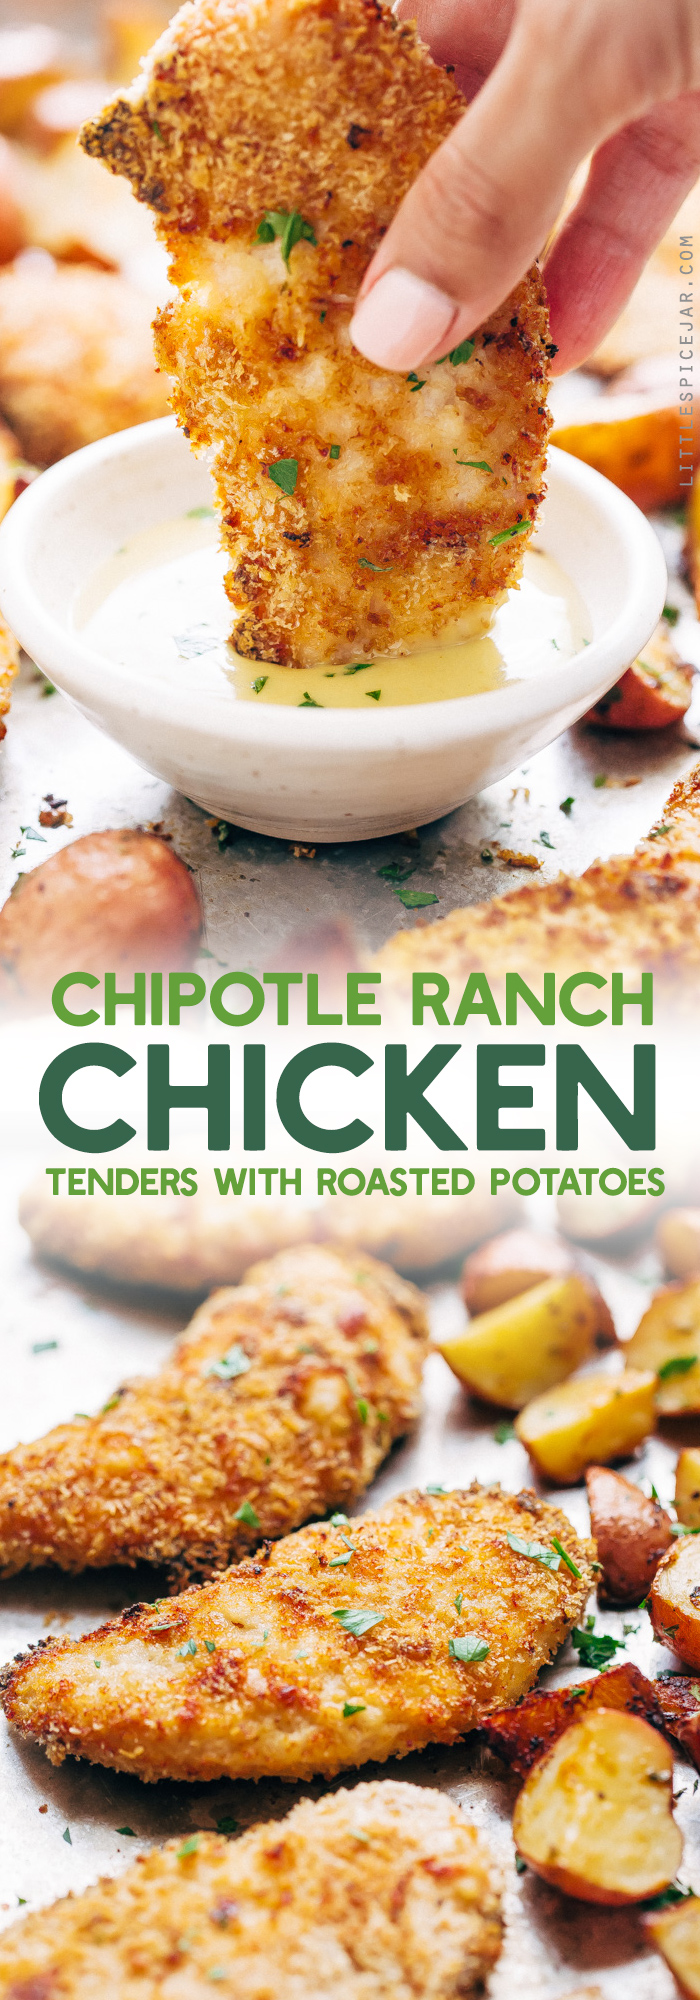 Crunchy Chipotle Ranch Chicken and Potatoes - 7 easy ingredients in this meal and comes with a side of ranch roasted potatoes! So good! #chickentenders #bakedchickentenders #ranchpotatoes | Littlespicejar.com